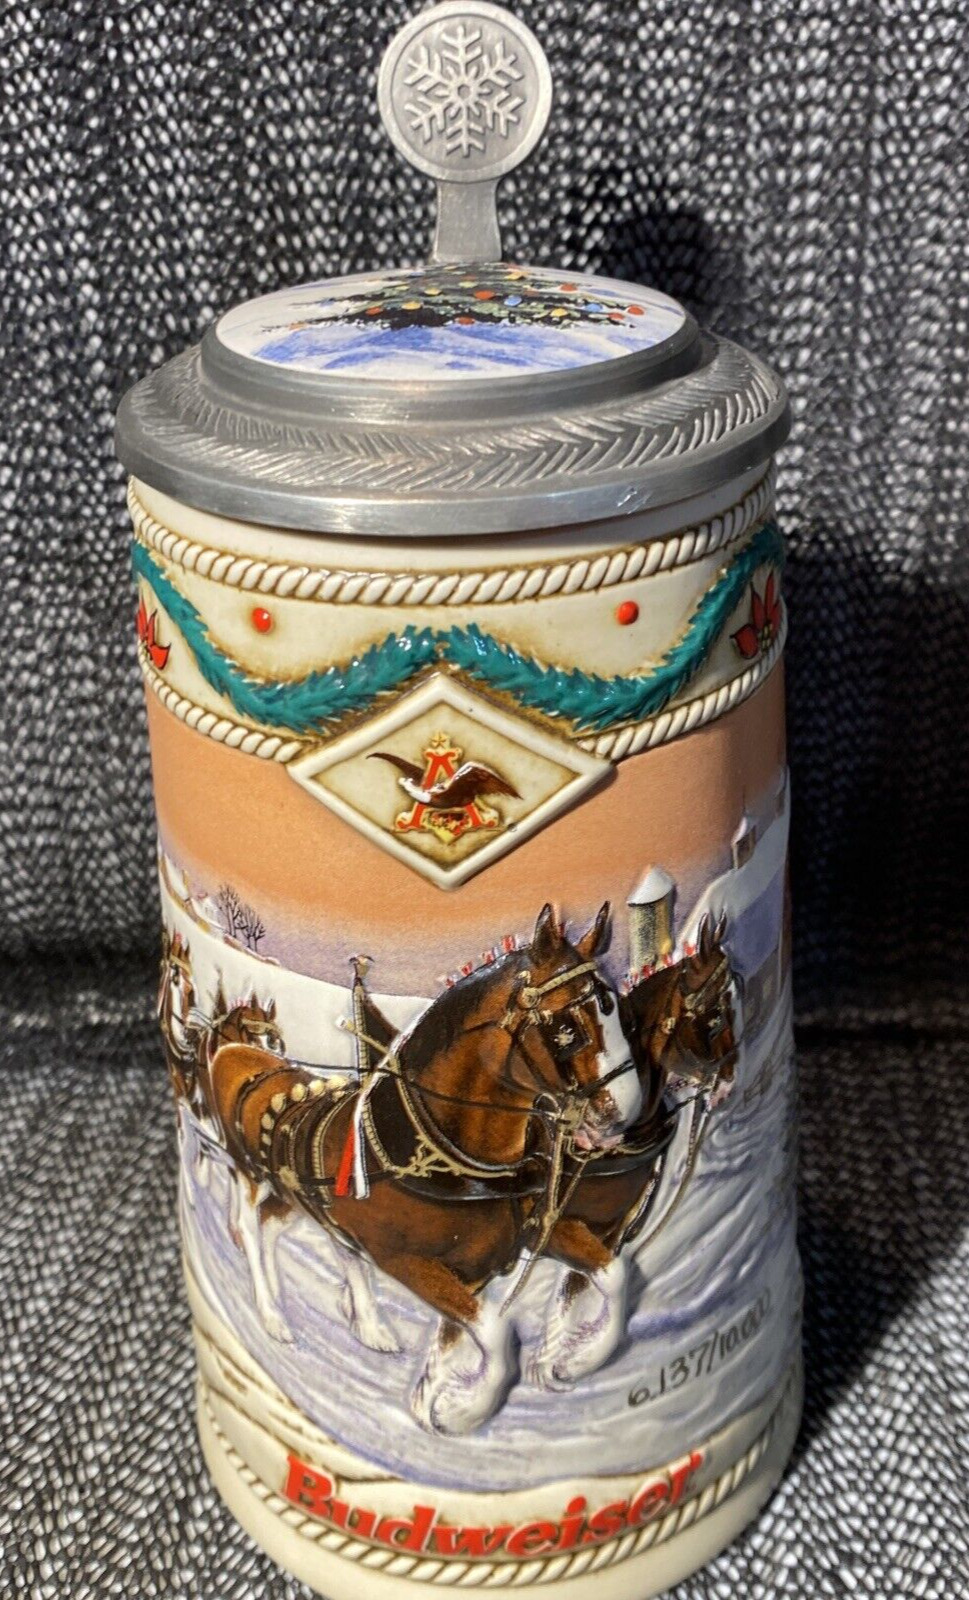 Budweiser AMERICAN HOMESTEAD 1996 Holiday Stein - Clydesdale Horses 3D Design 